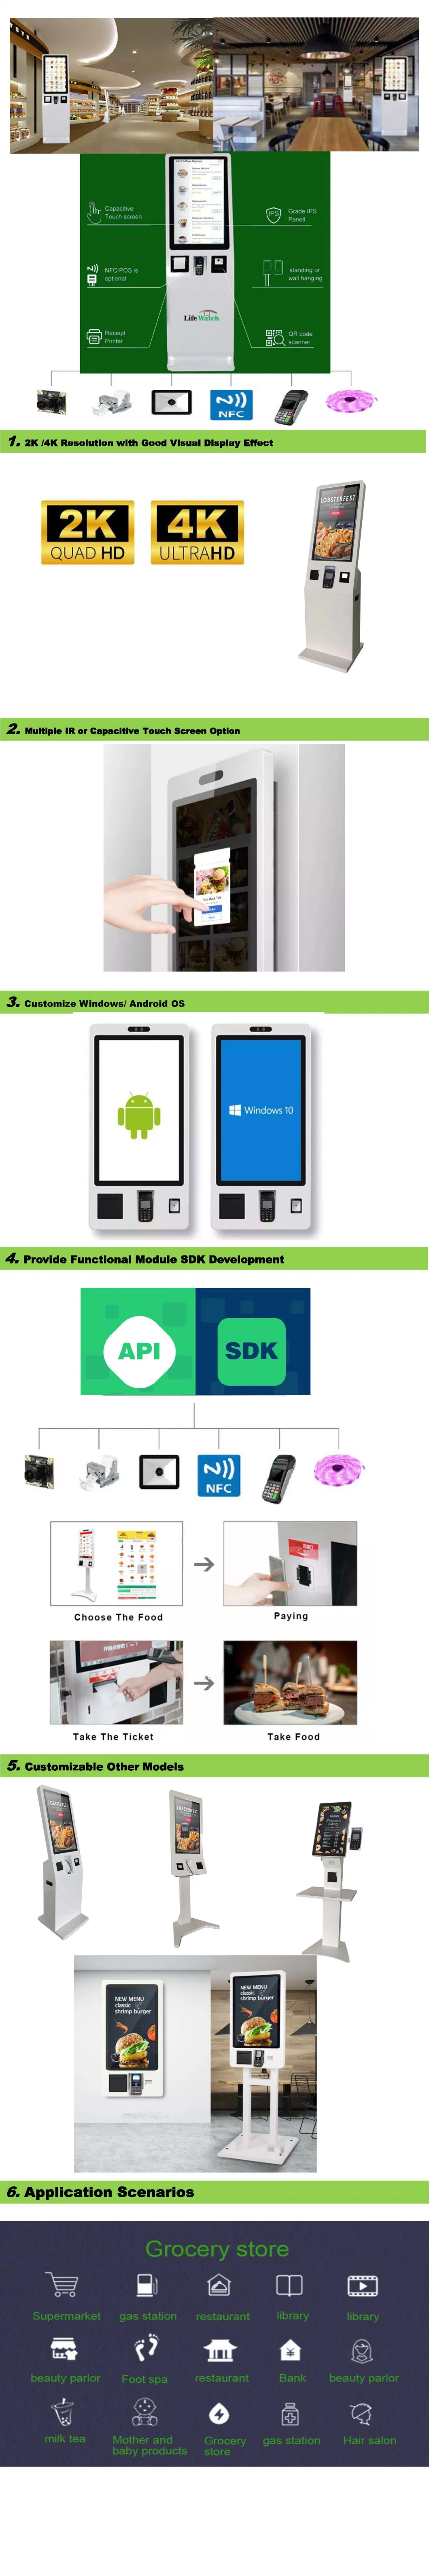 32-Inch Android or Windows Free Stand Self-Service Order Payment Check-out LCD Kiosk Terminal Built-in Camera NFC Module Qr Scanner